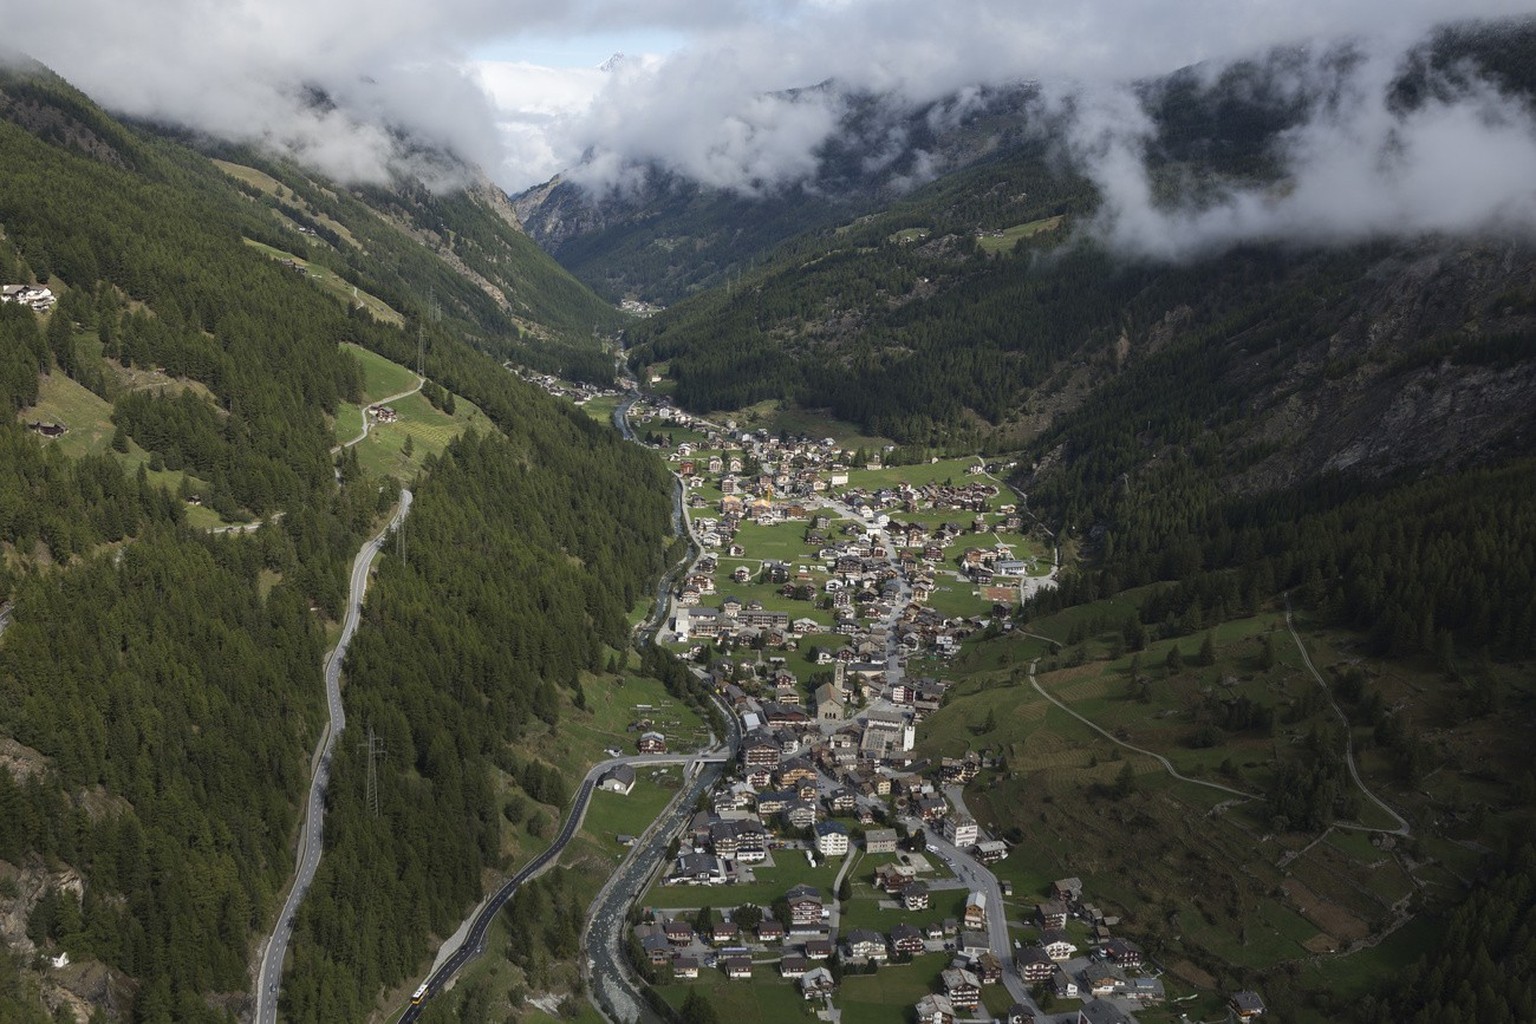 The village just below the Trift Glacier in Saas-Grund, Valais, Switzerland, Sunday, September 10, 2017. Two third of the fast moving ice zone of the Trift Glacier fell down over night. The population ...